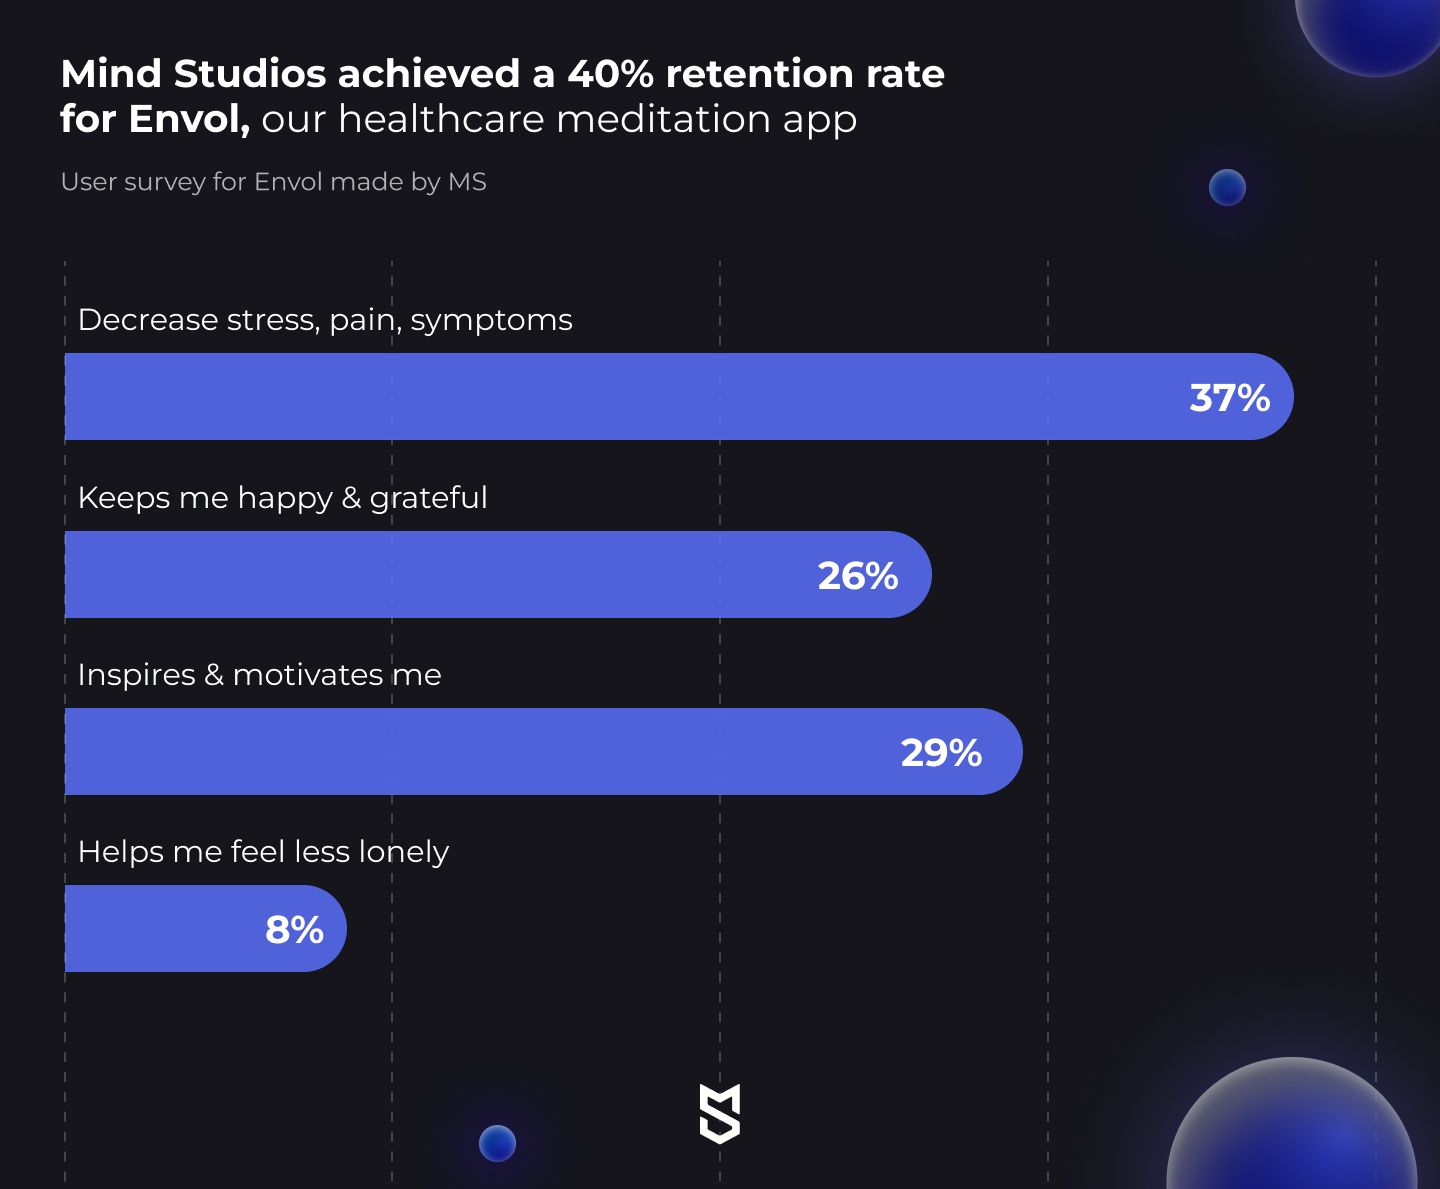 How Mind Studios achieved a 40% retention rate for Envol, our healthcare meditation app